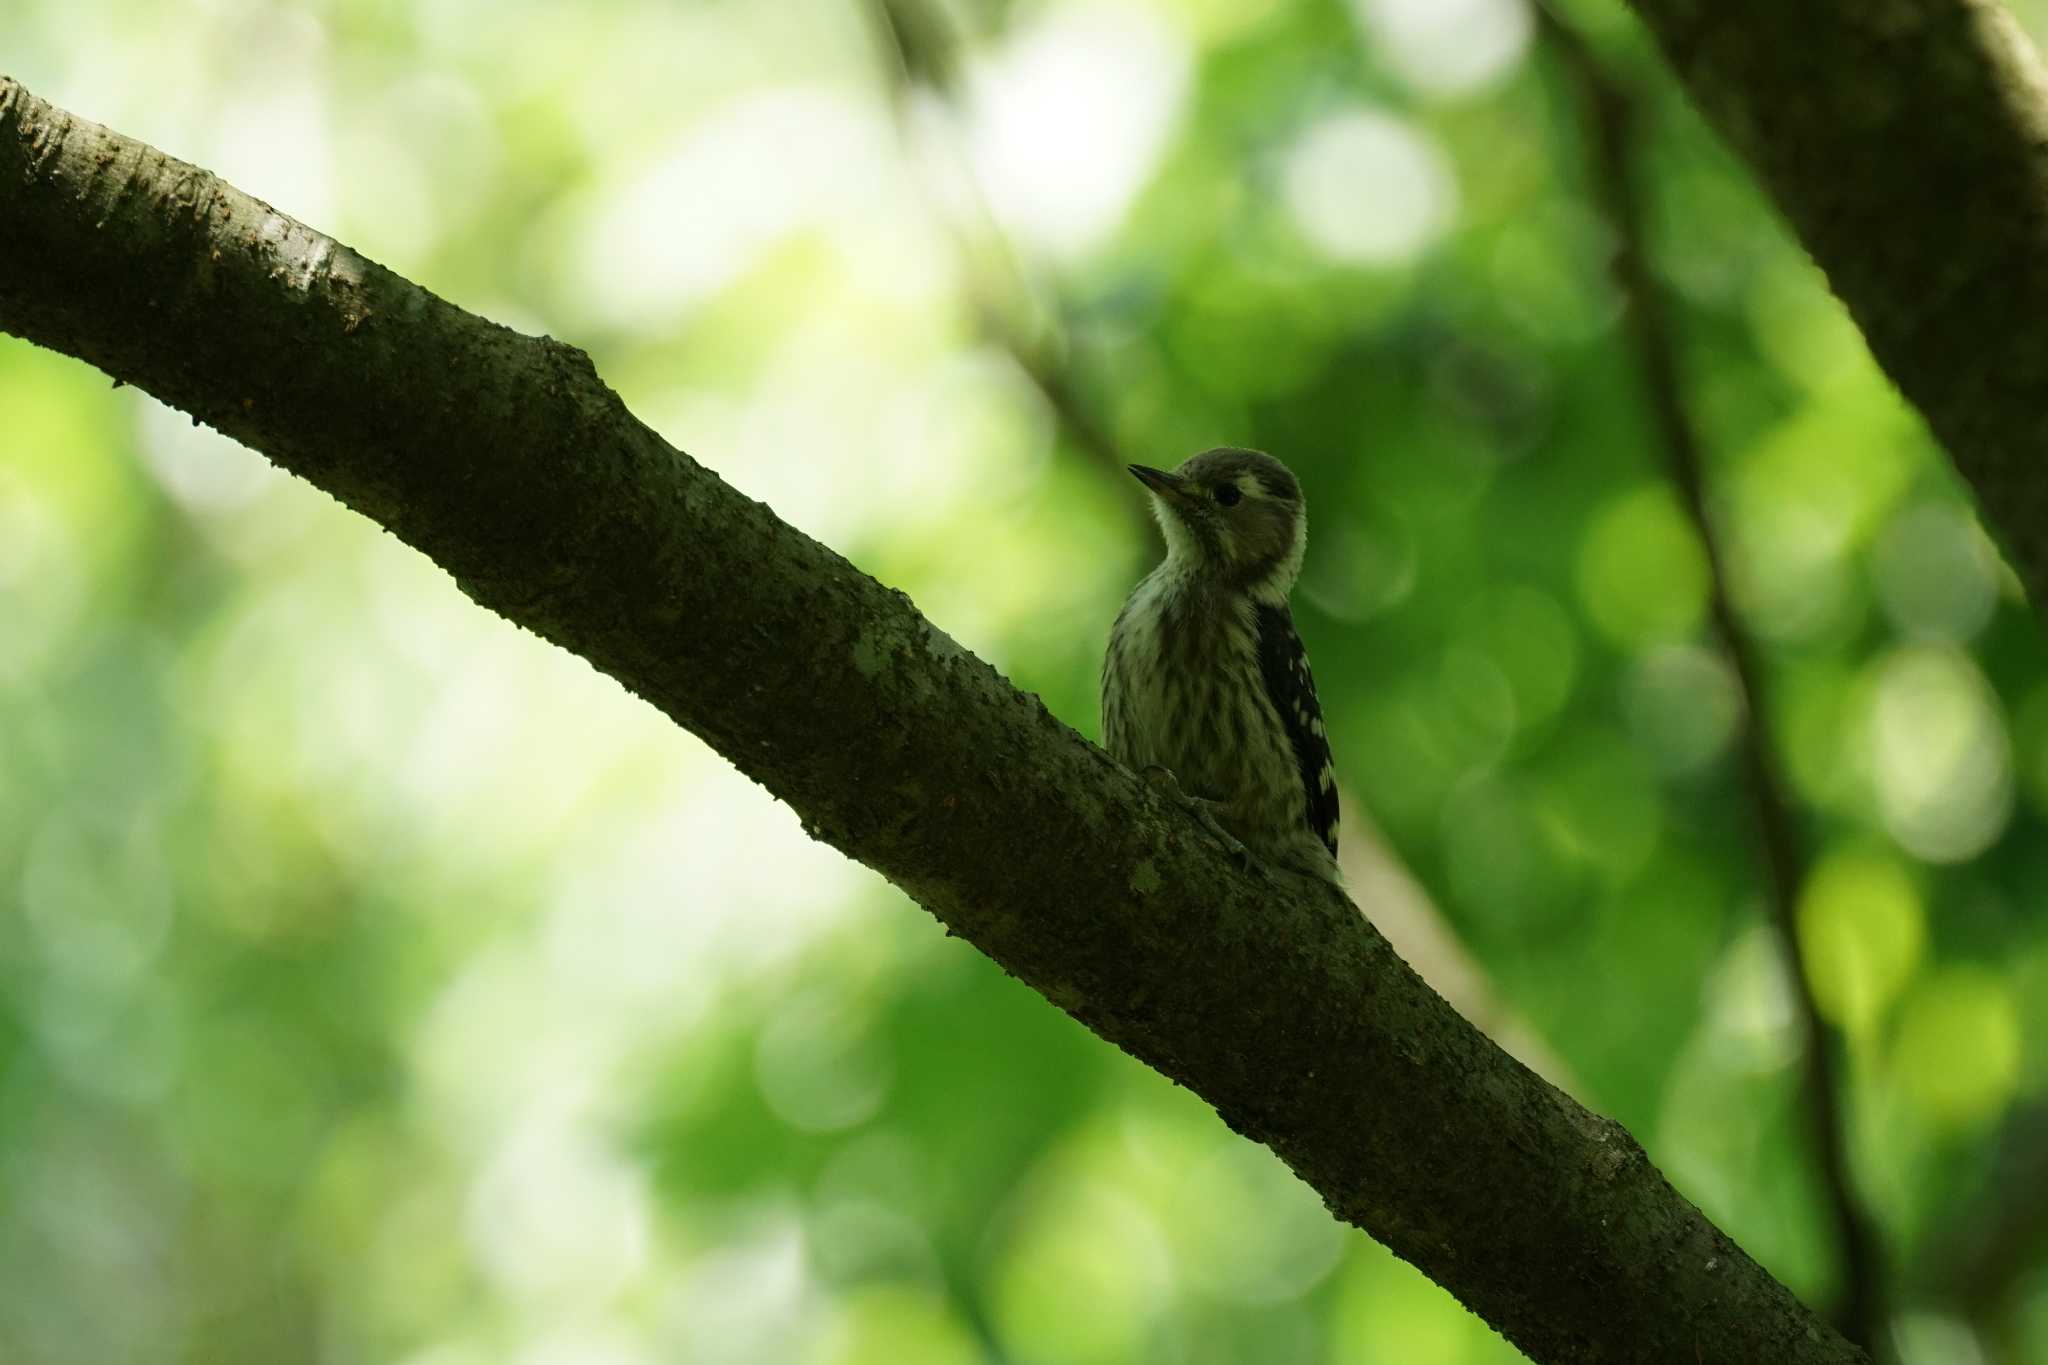 Photo of Japanese Pygmy Woodpecker at 宍道ふるさと森林公園 by ひらも